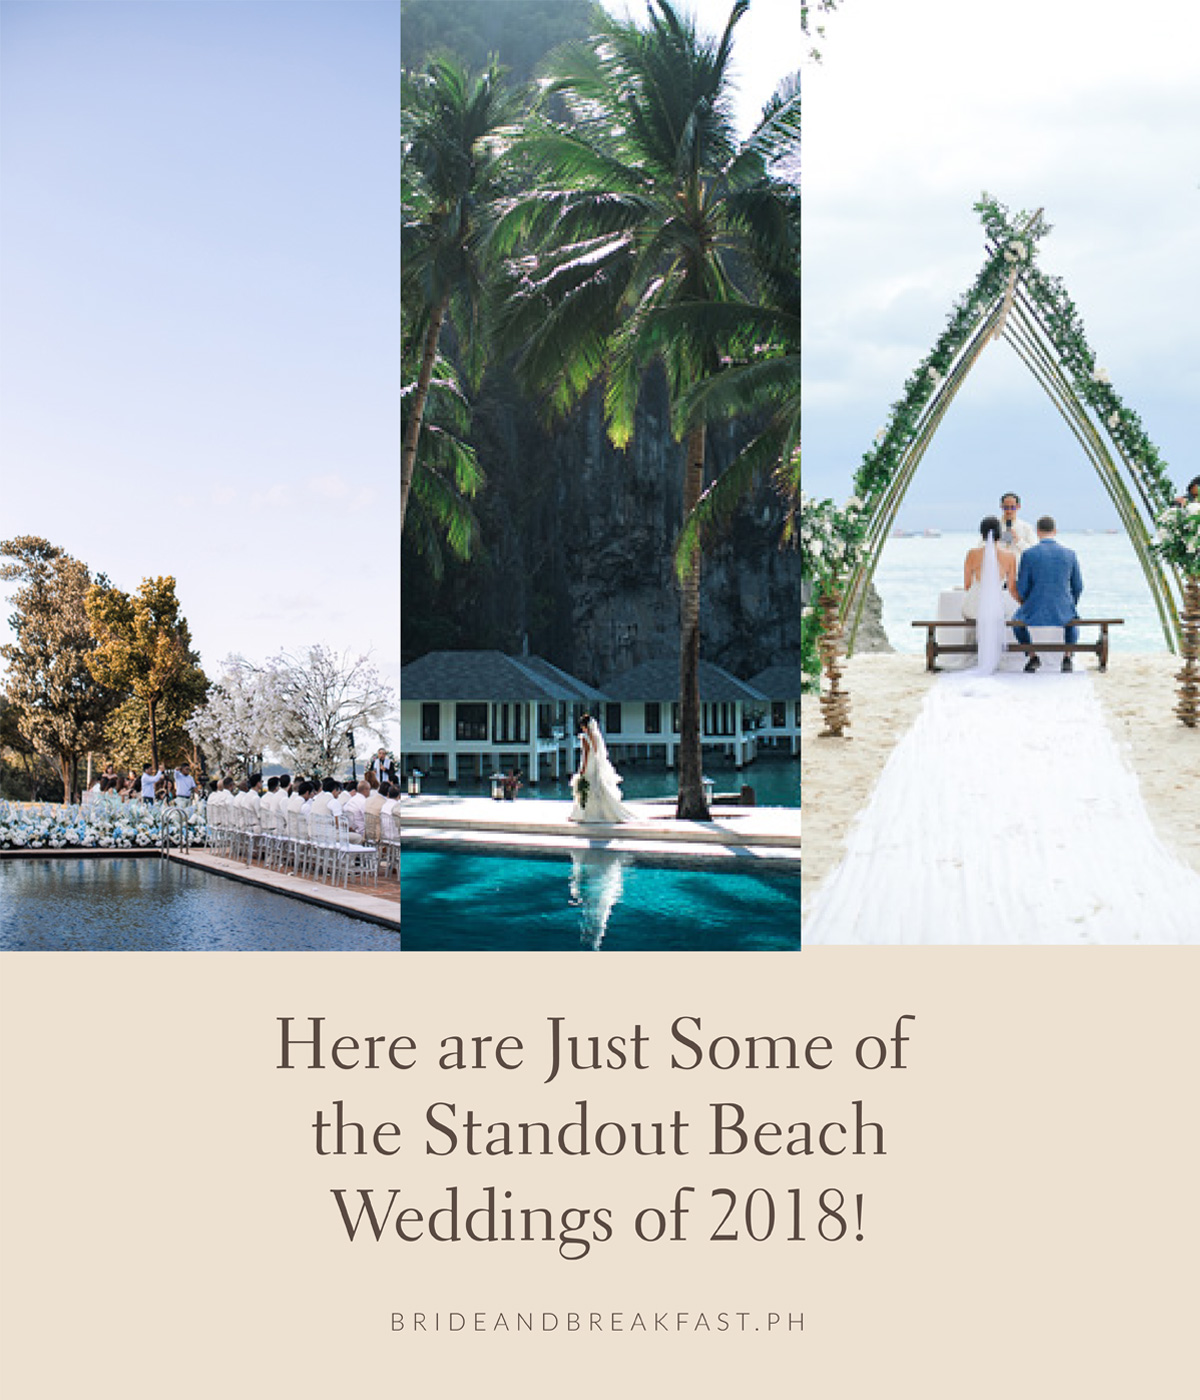 Here are Just Some of the Standout Beach Weddings of 2018!